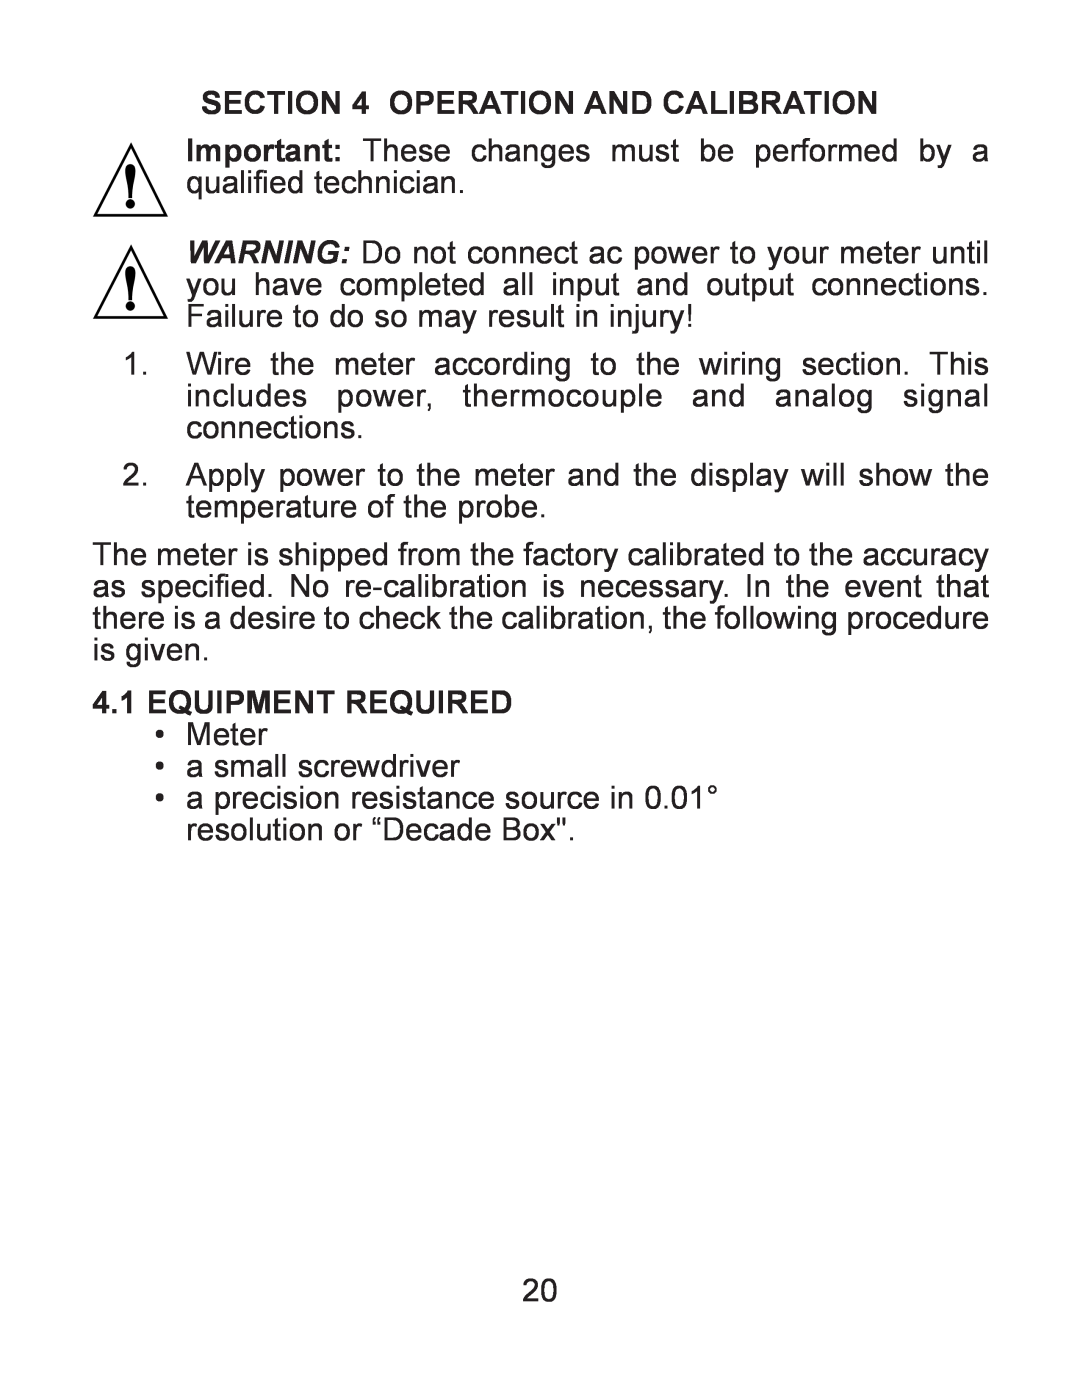 Omega DP119-RTD manual Operation And Calibration, Equipment Required 